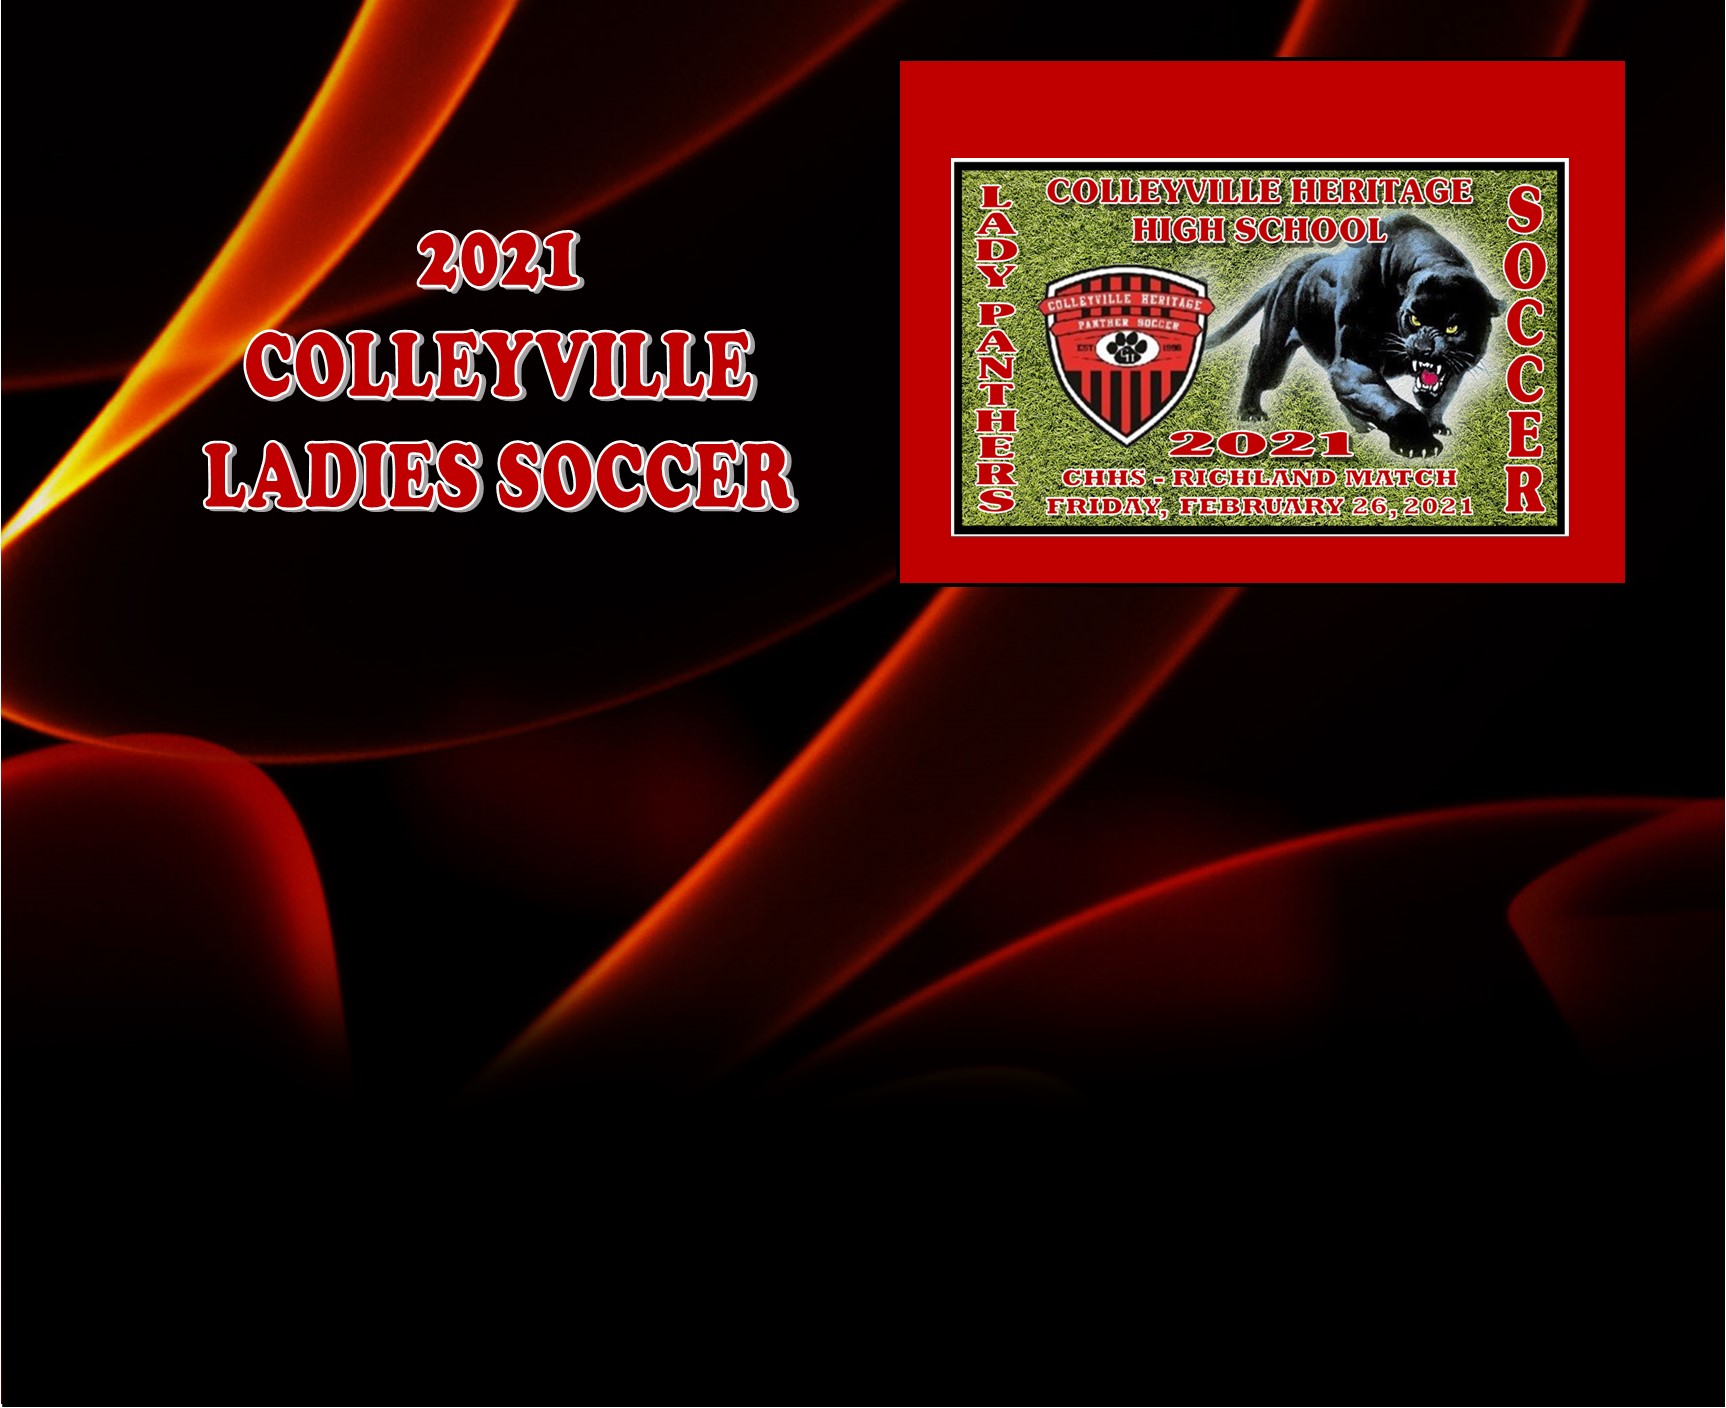 GCISD Ladies Soccer: Colleyville Panthers Shutout the Richland Royals 4-0